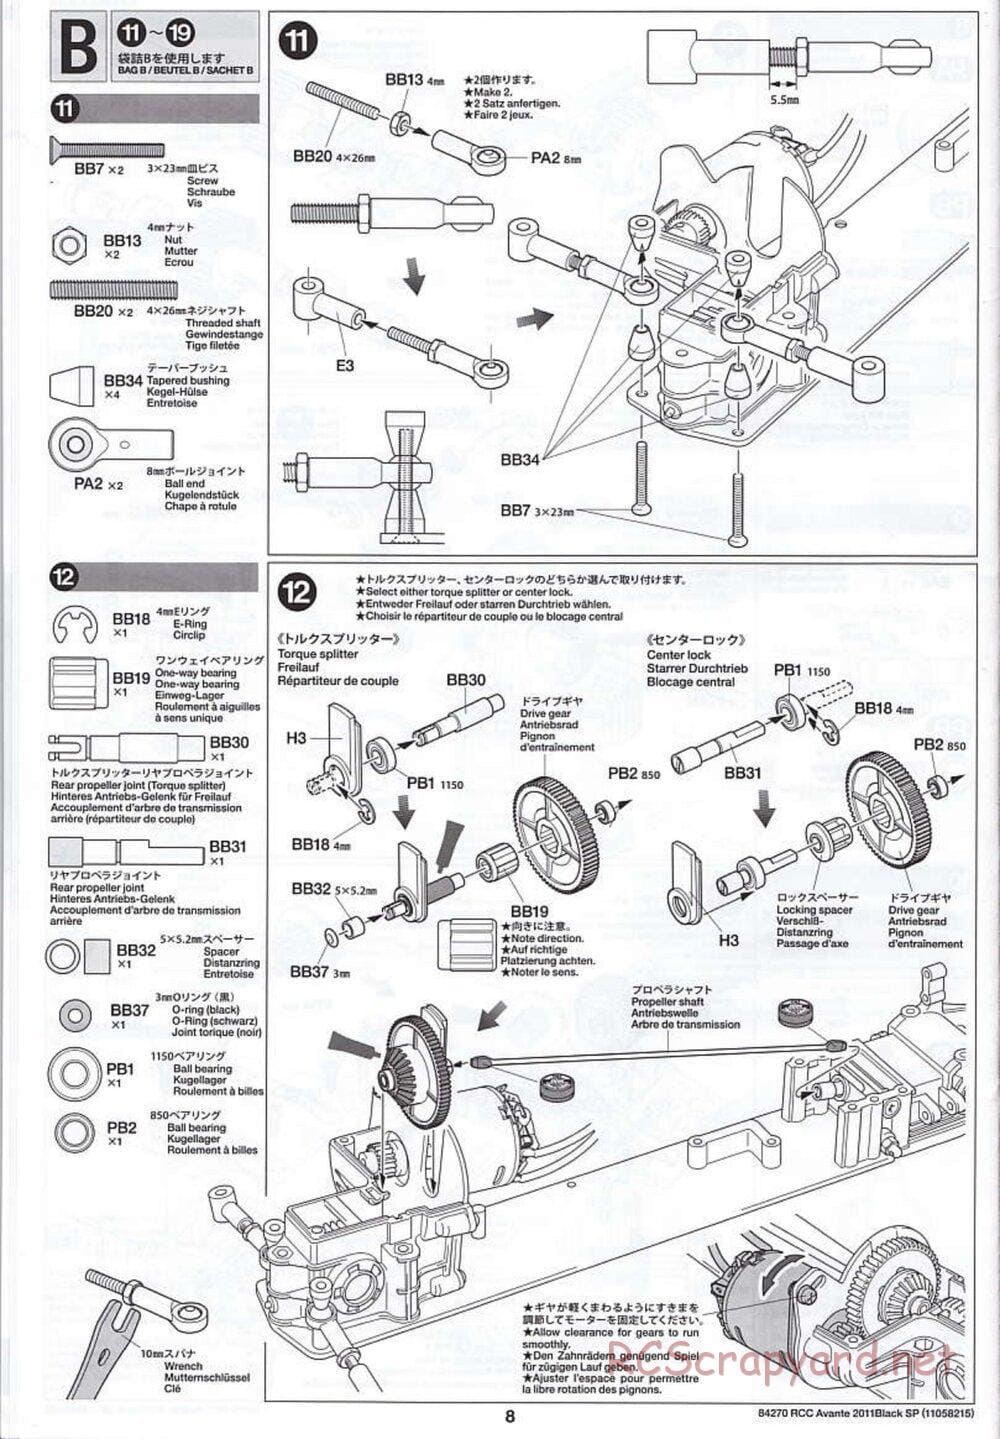 Tamiya - Avante 2011 - Black Special Chassis - Manual - Page 8